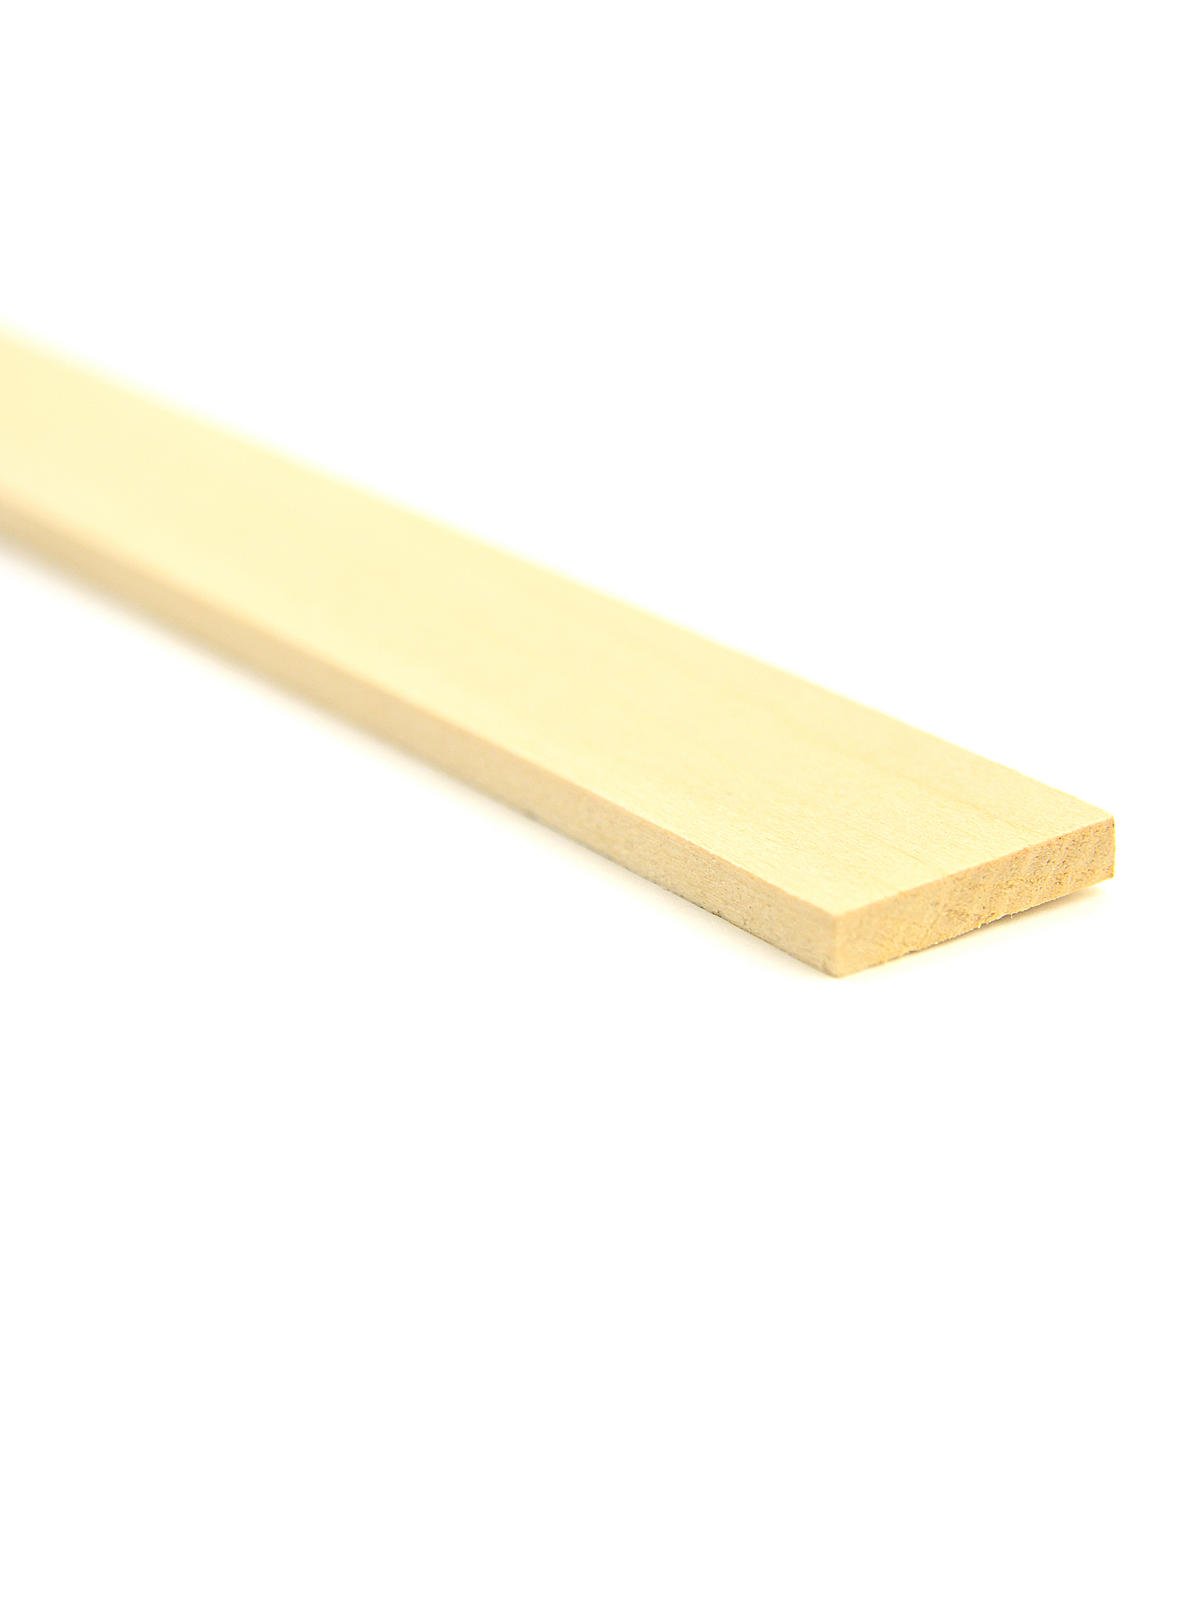 Midwest Products Genuine Basswood Sheet - 20 Sheets, 3/32 x 3 x 36